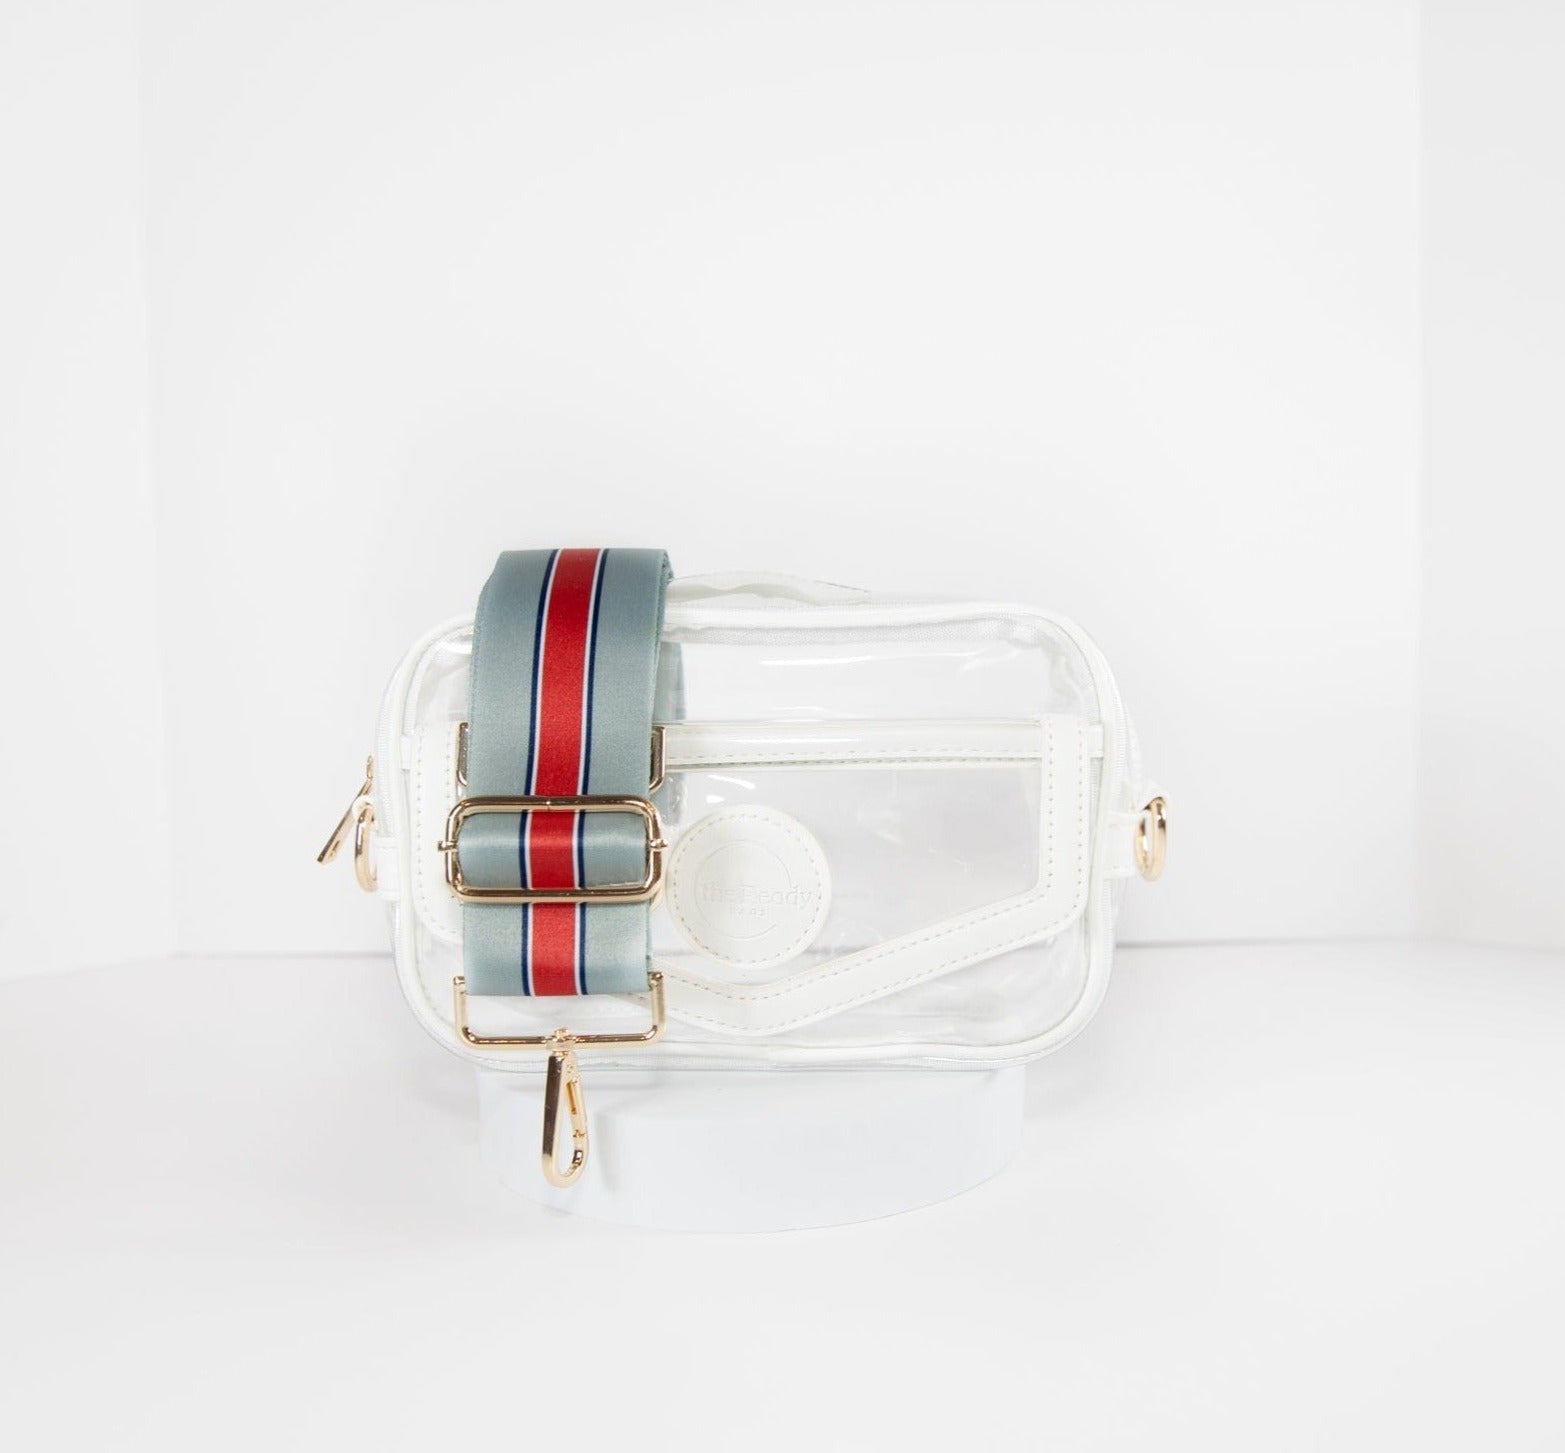 Clear stadium bag in white leather trim, front facing, with the strap in the team colors of the New England Patriots.